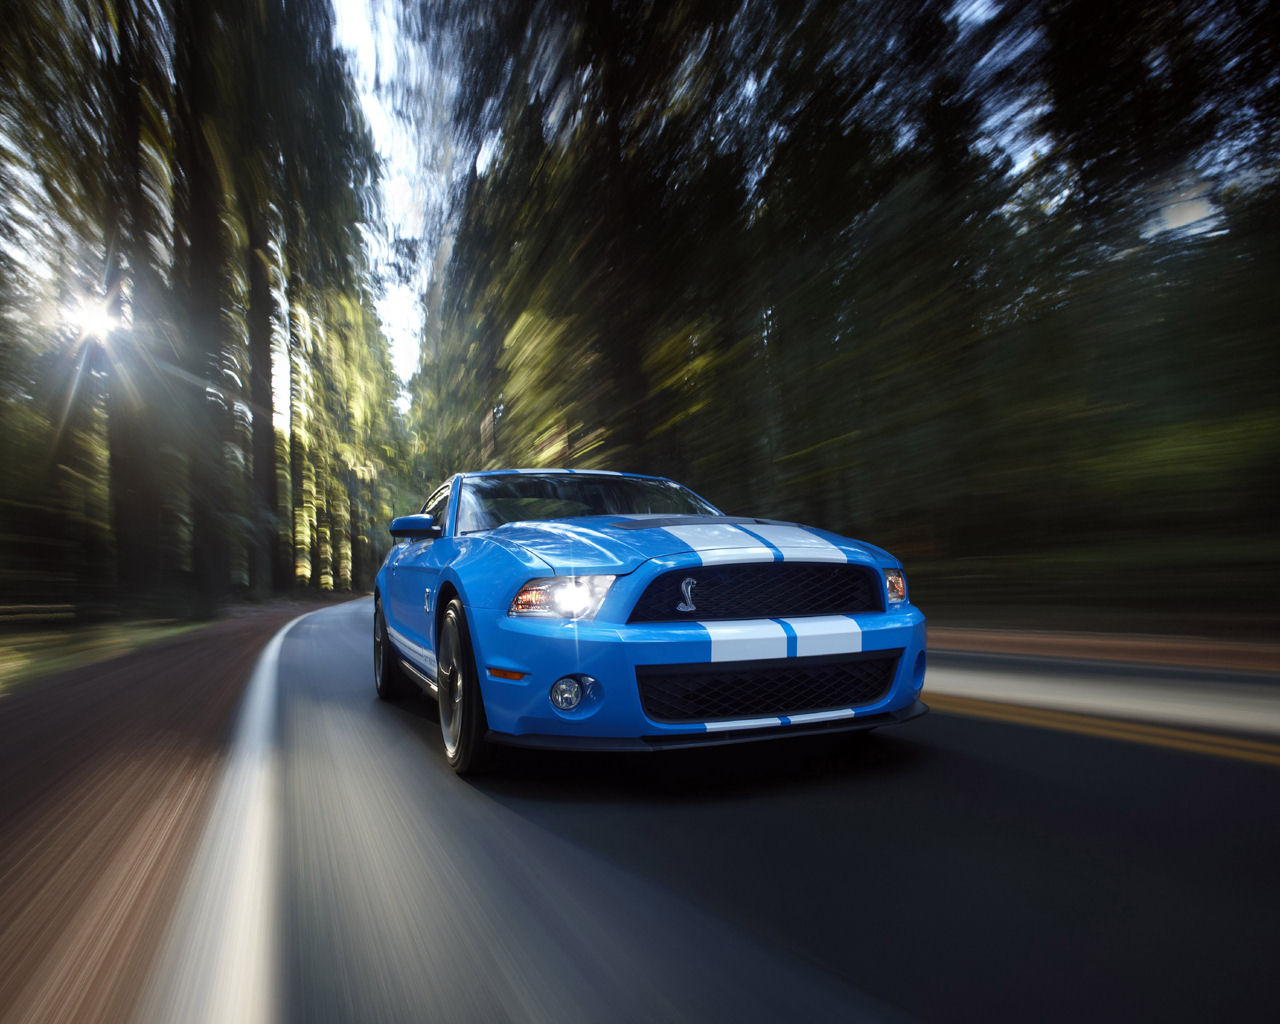 wallpaper 1024,land vehicle,vehicle,car,shelby mustang,coupé